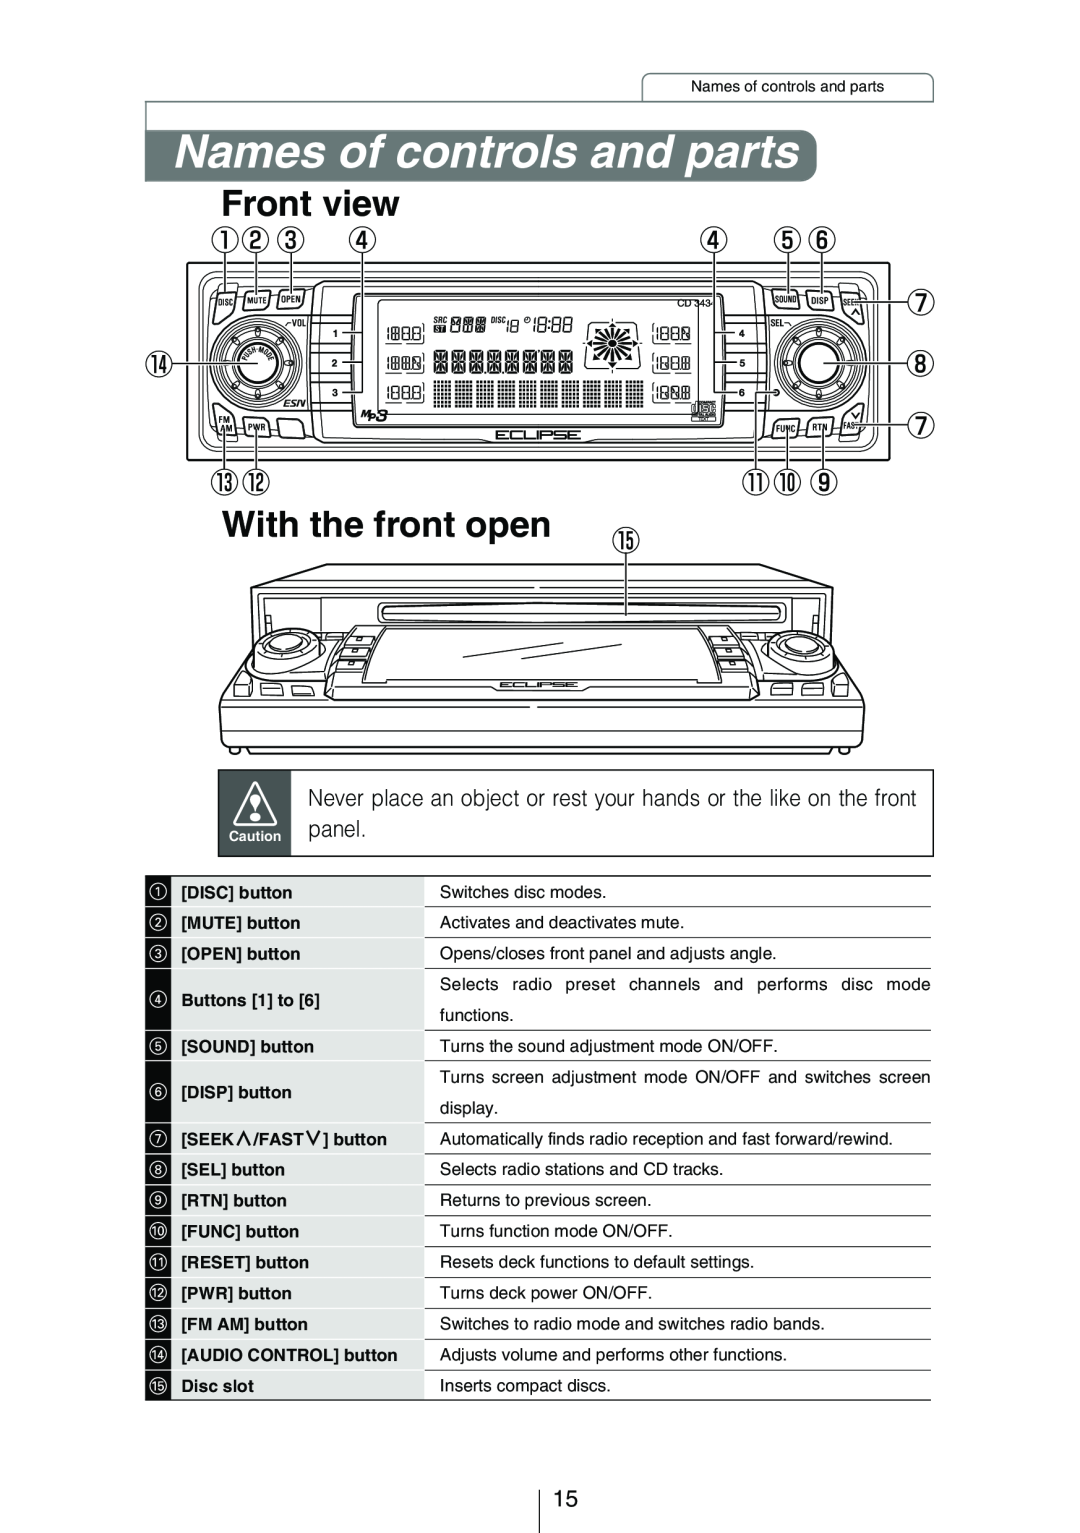 Eclipse - Fujitsu Ten CD3434 owner manual Names of controls and parts, Front view, With the front open 